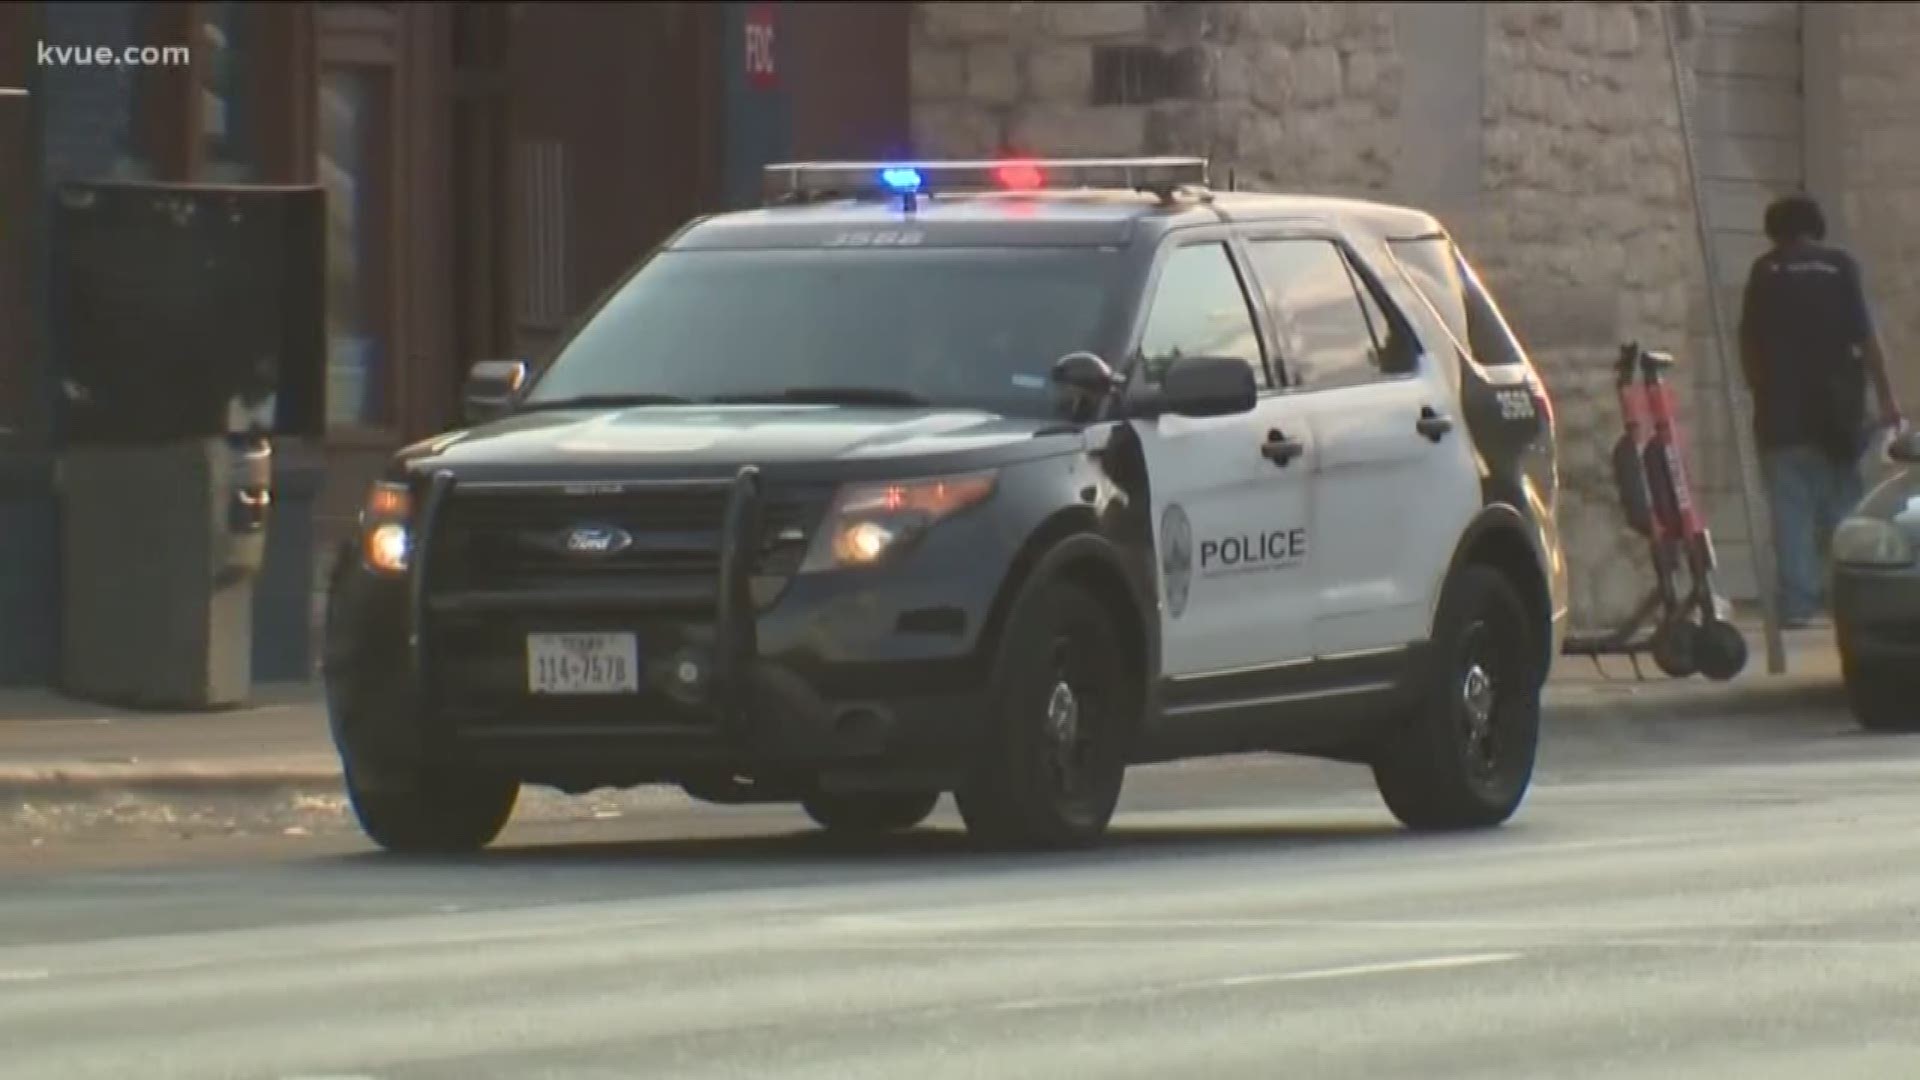 The City of Austin's new budget includes money to hire 30 new police officers – but some say that's not nearly enough to keep up with the city's rapid growth.